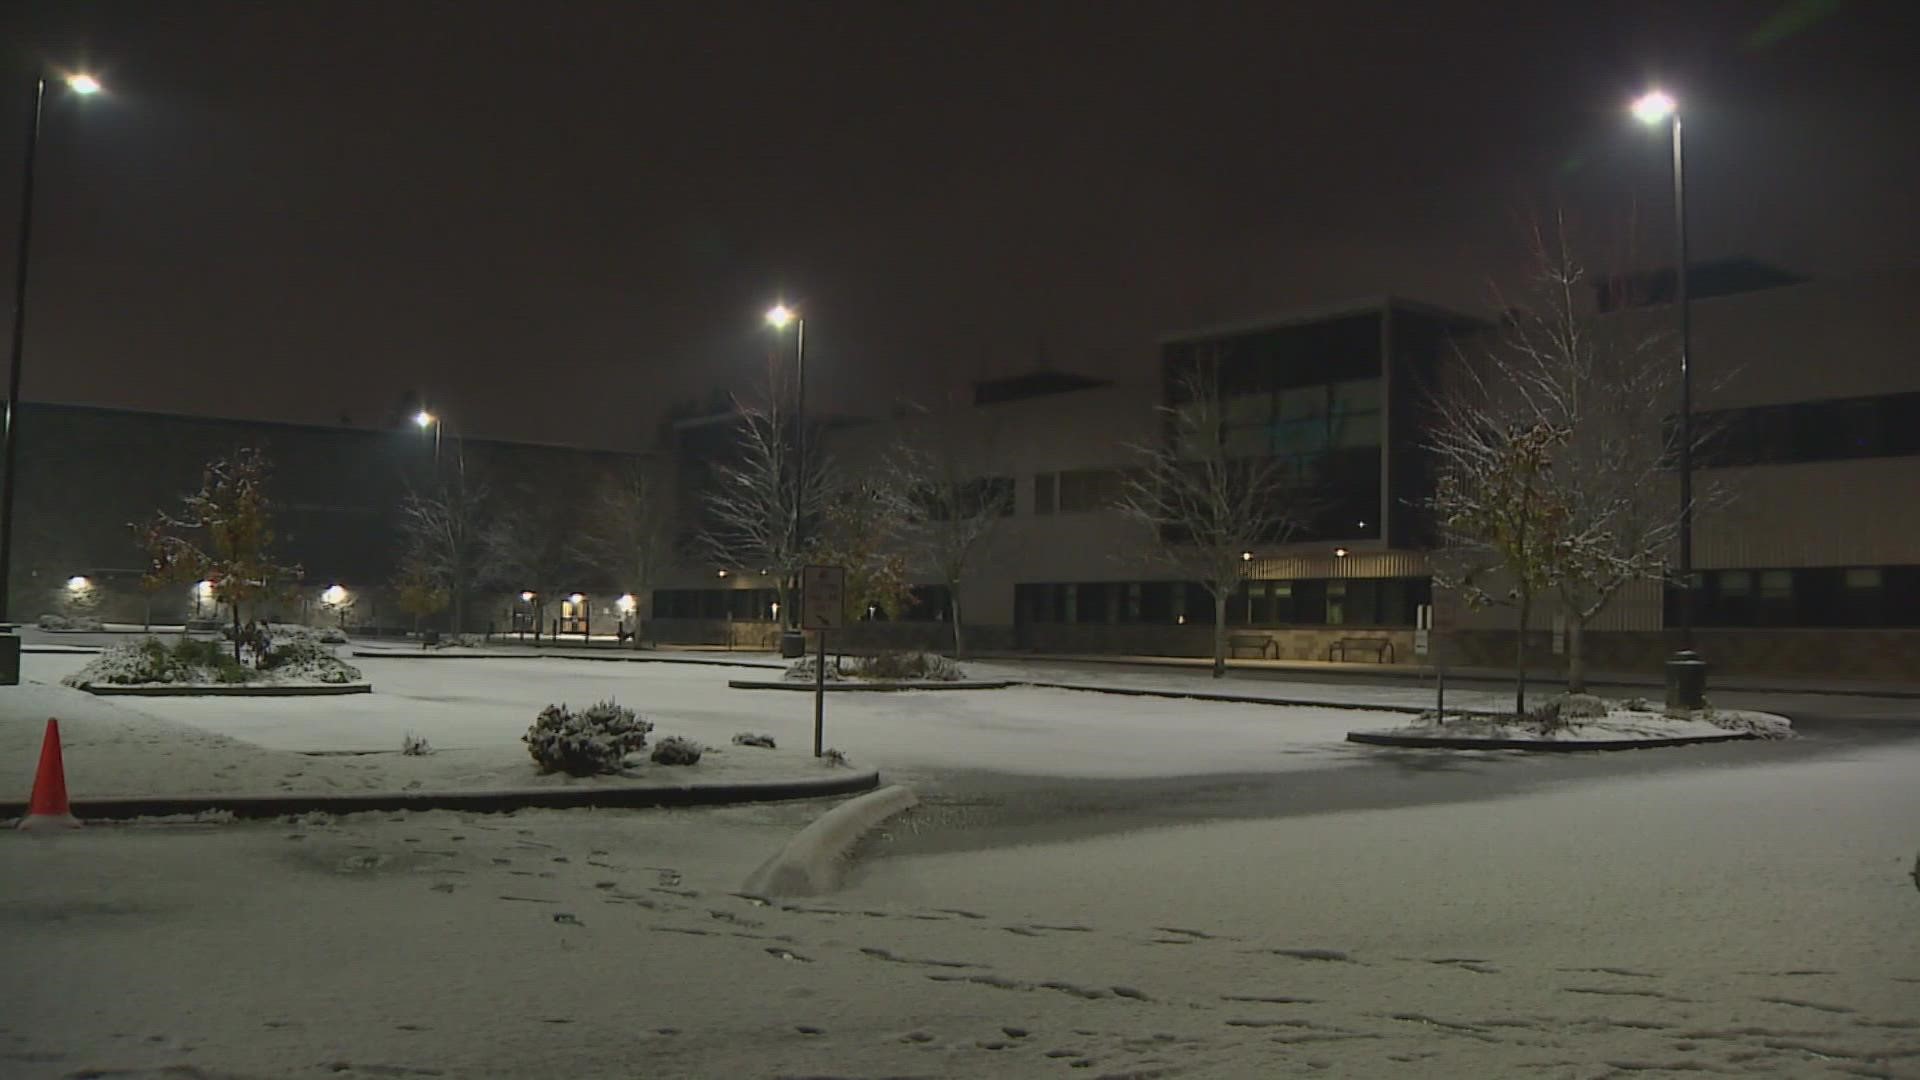 Puyallup School District will not be open Monday after a snowy weekend.